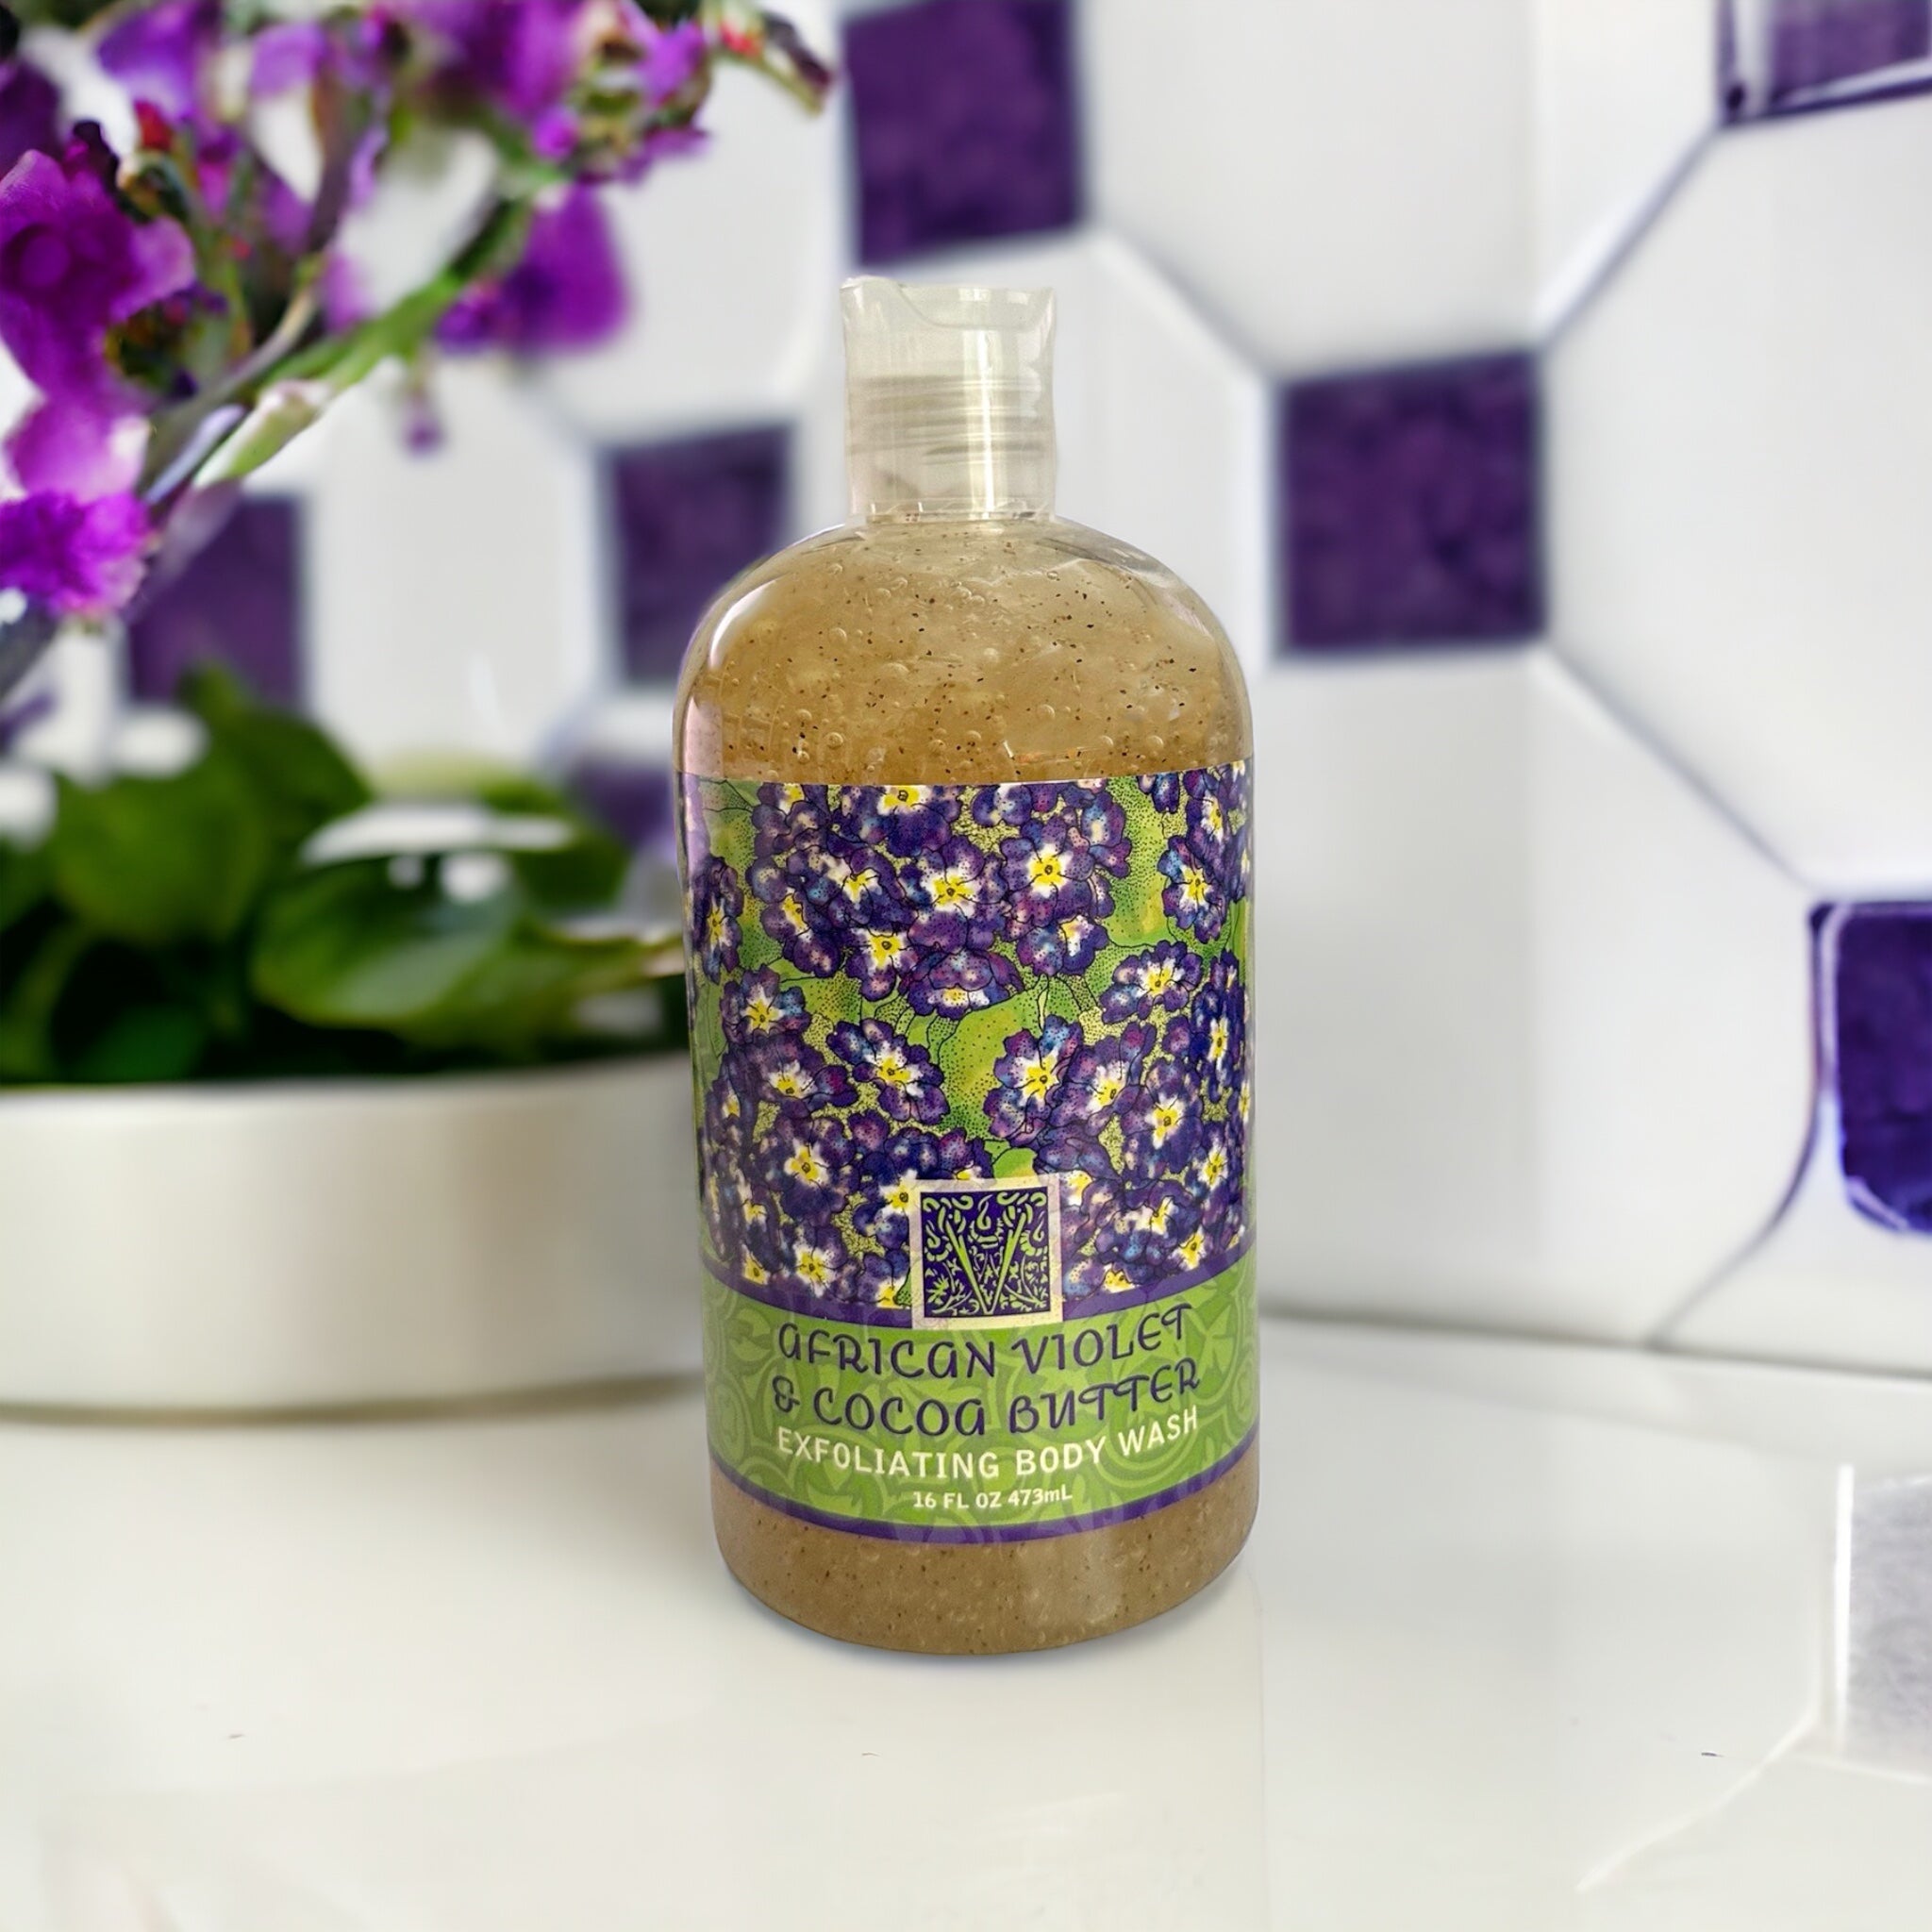 AFRICAN VIOLET Cocoa Butter Exfoliating Body Wash Greenwich Bay Trading Company